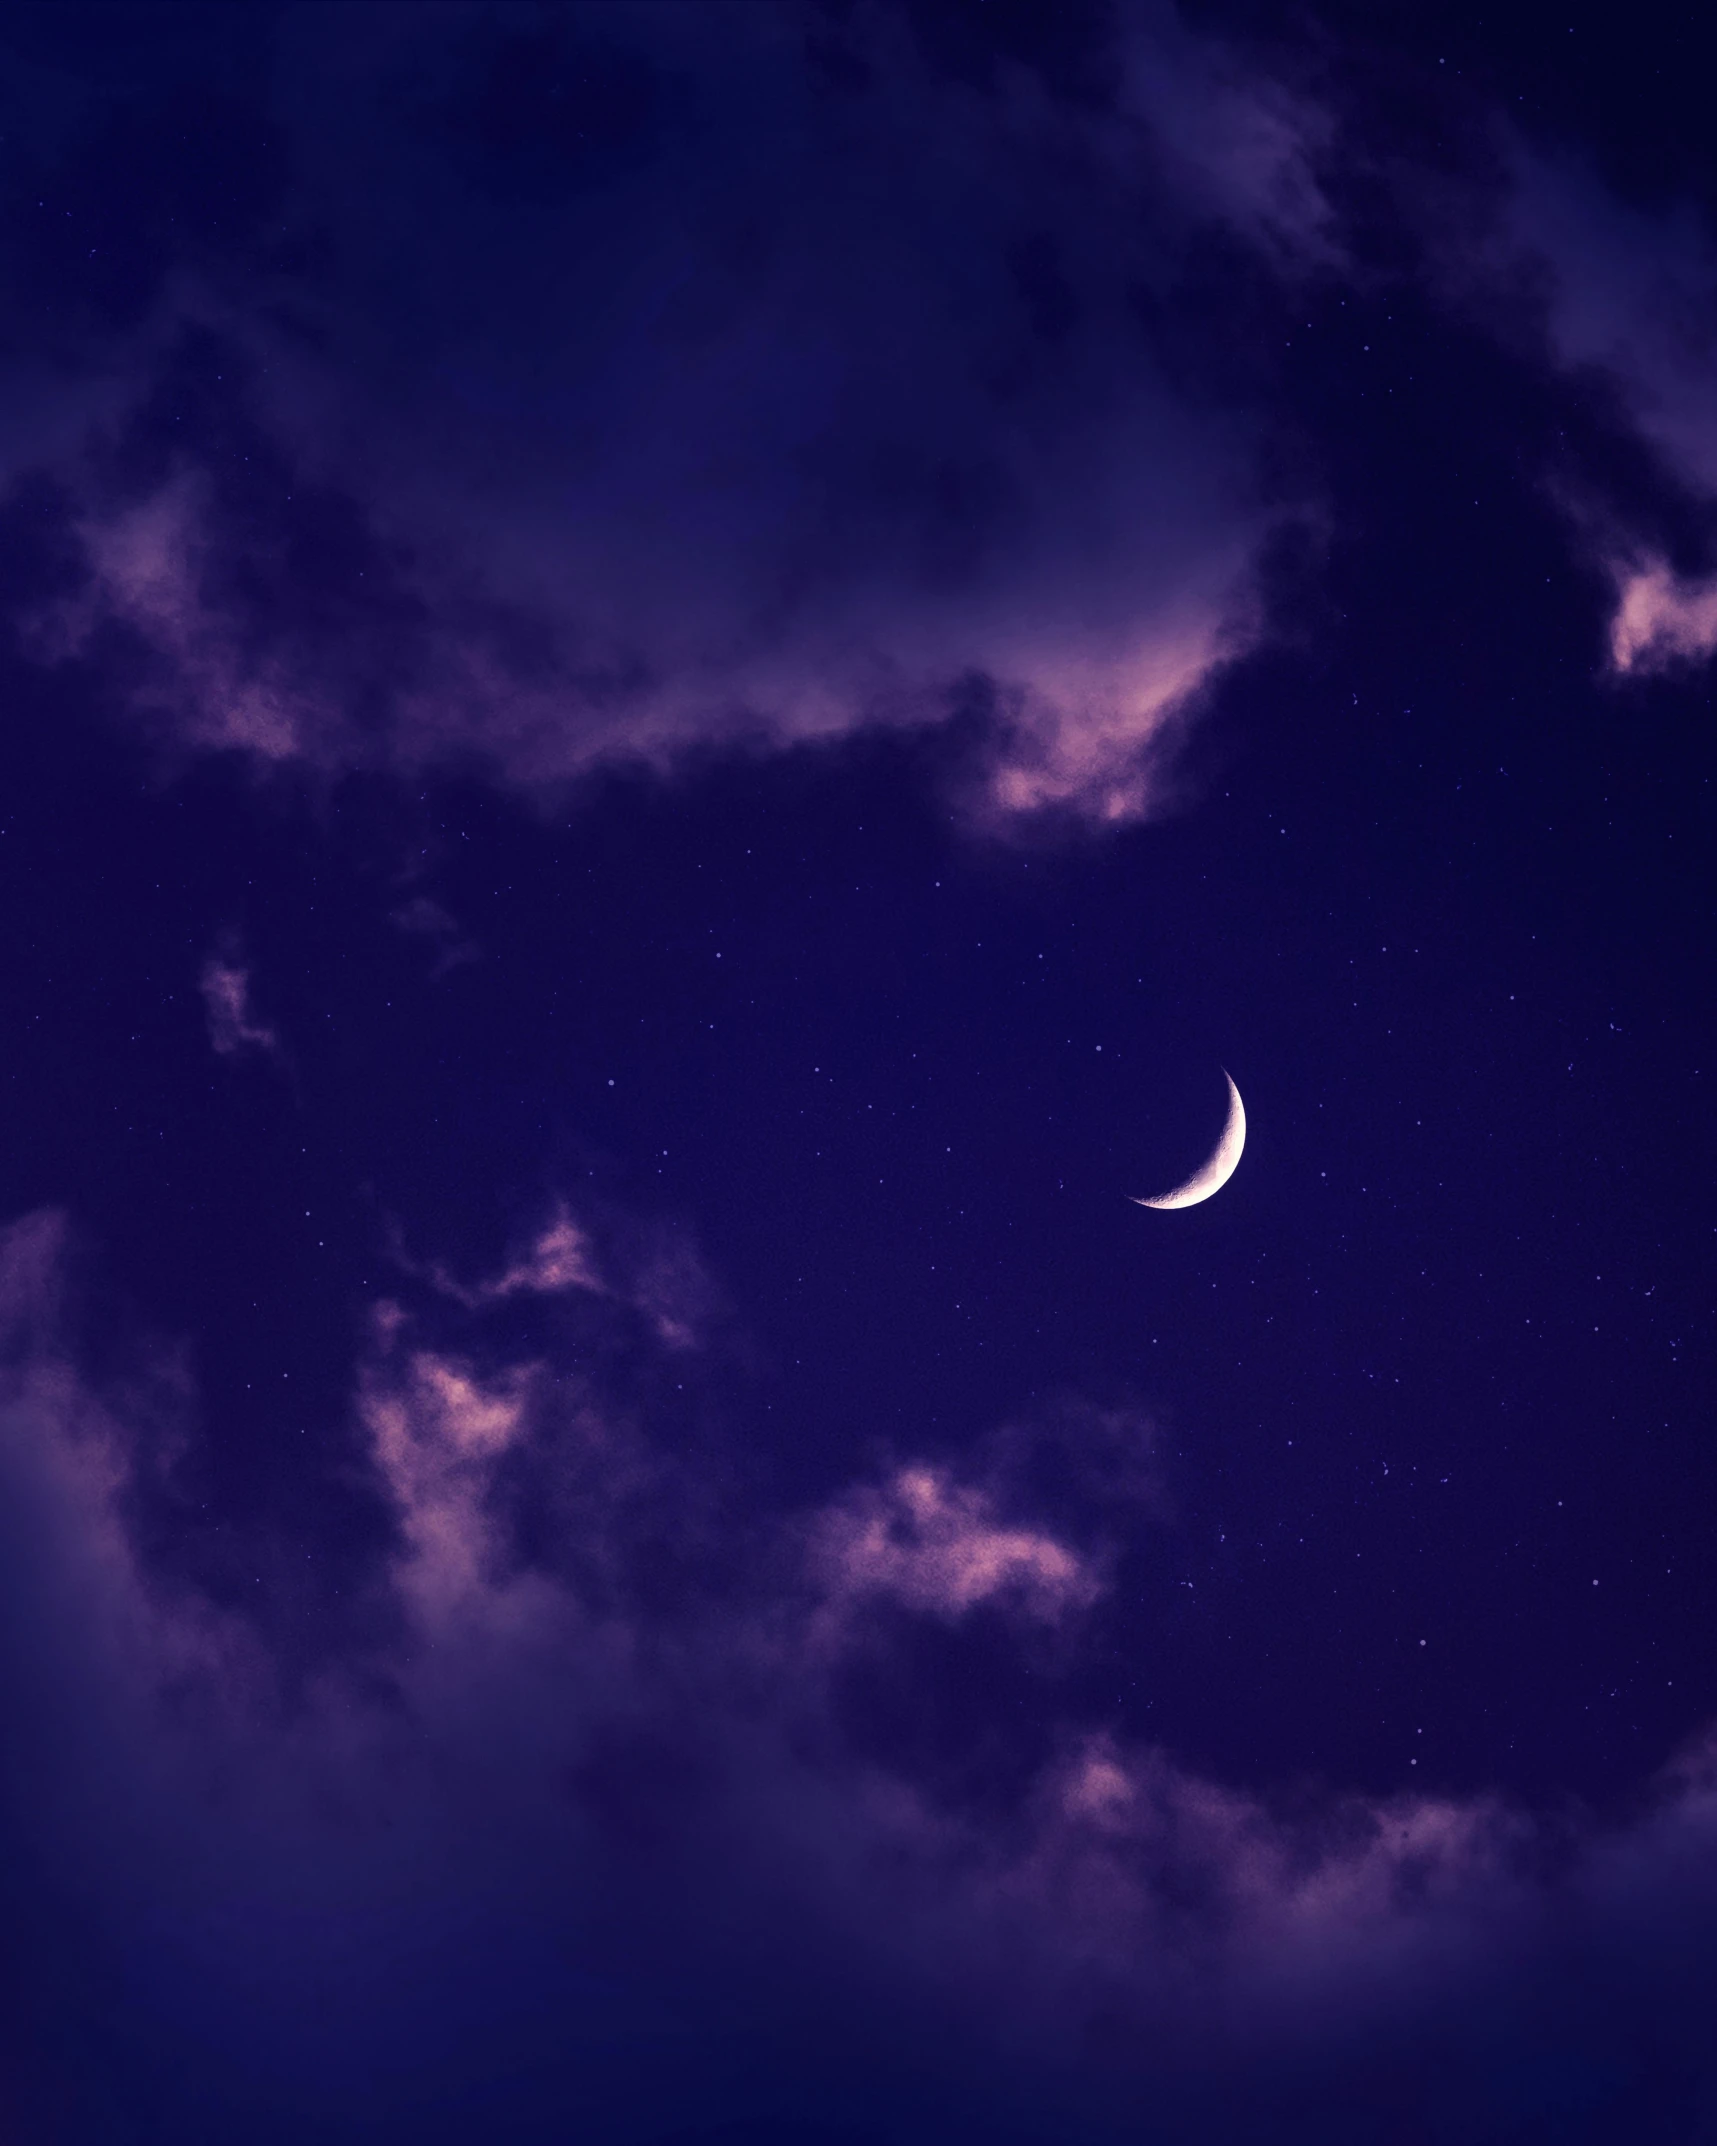 a crescent in the night sky with clouds, an album cover, trending on pexels, ☁🌪🌙👩🏾, midnight color palette, sleepy, purple